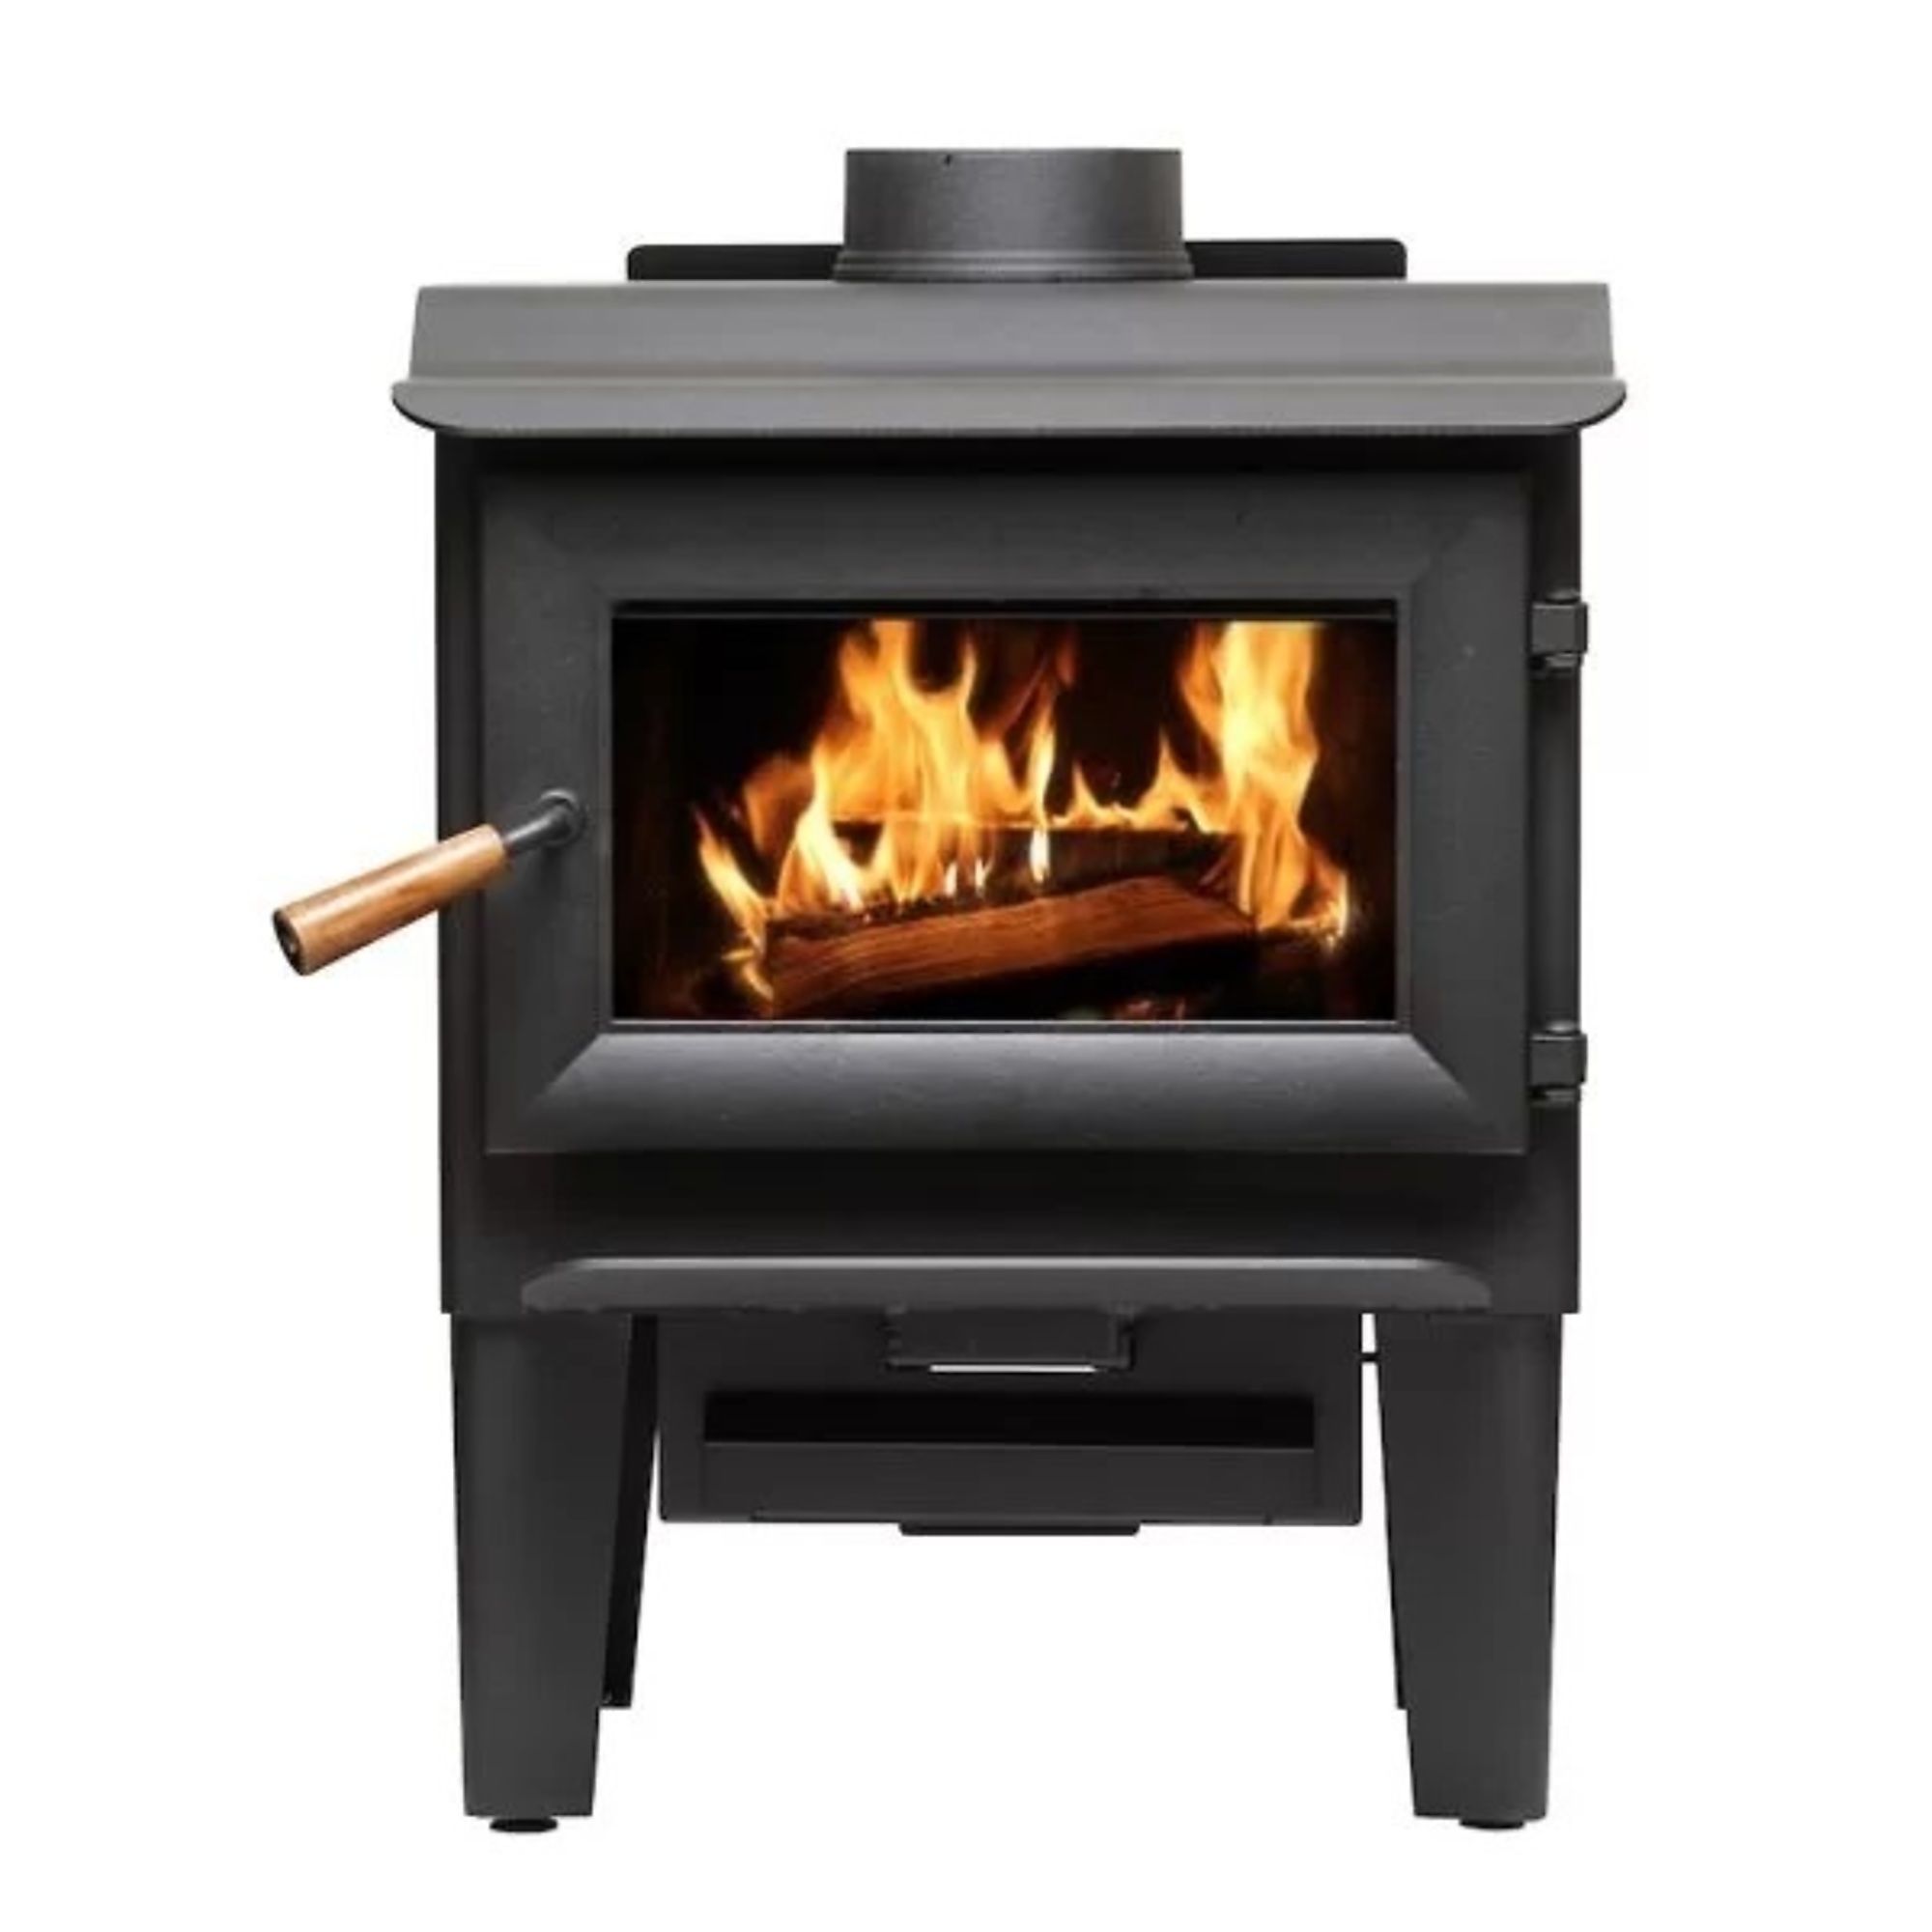 Vogelzang, 1200 Sq. Ft. Wood Stove with Legs, Heat Output 68000 Btu/hour, Heating Capability 1200 ftÂ², Model VG1120-L